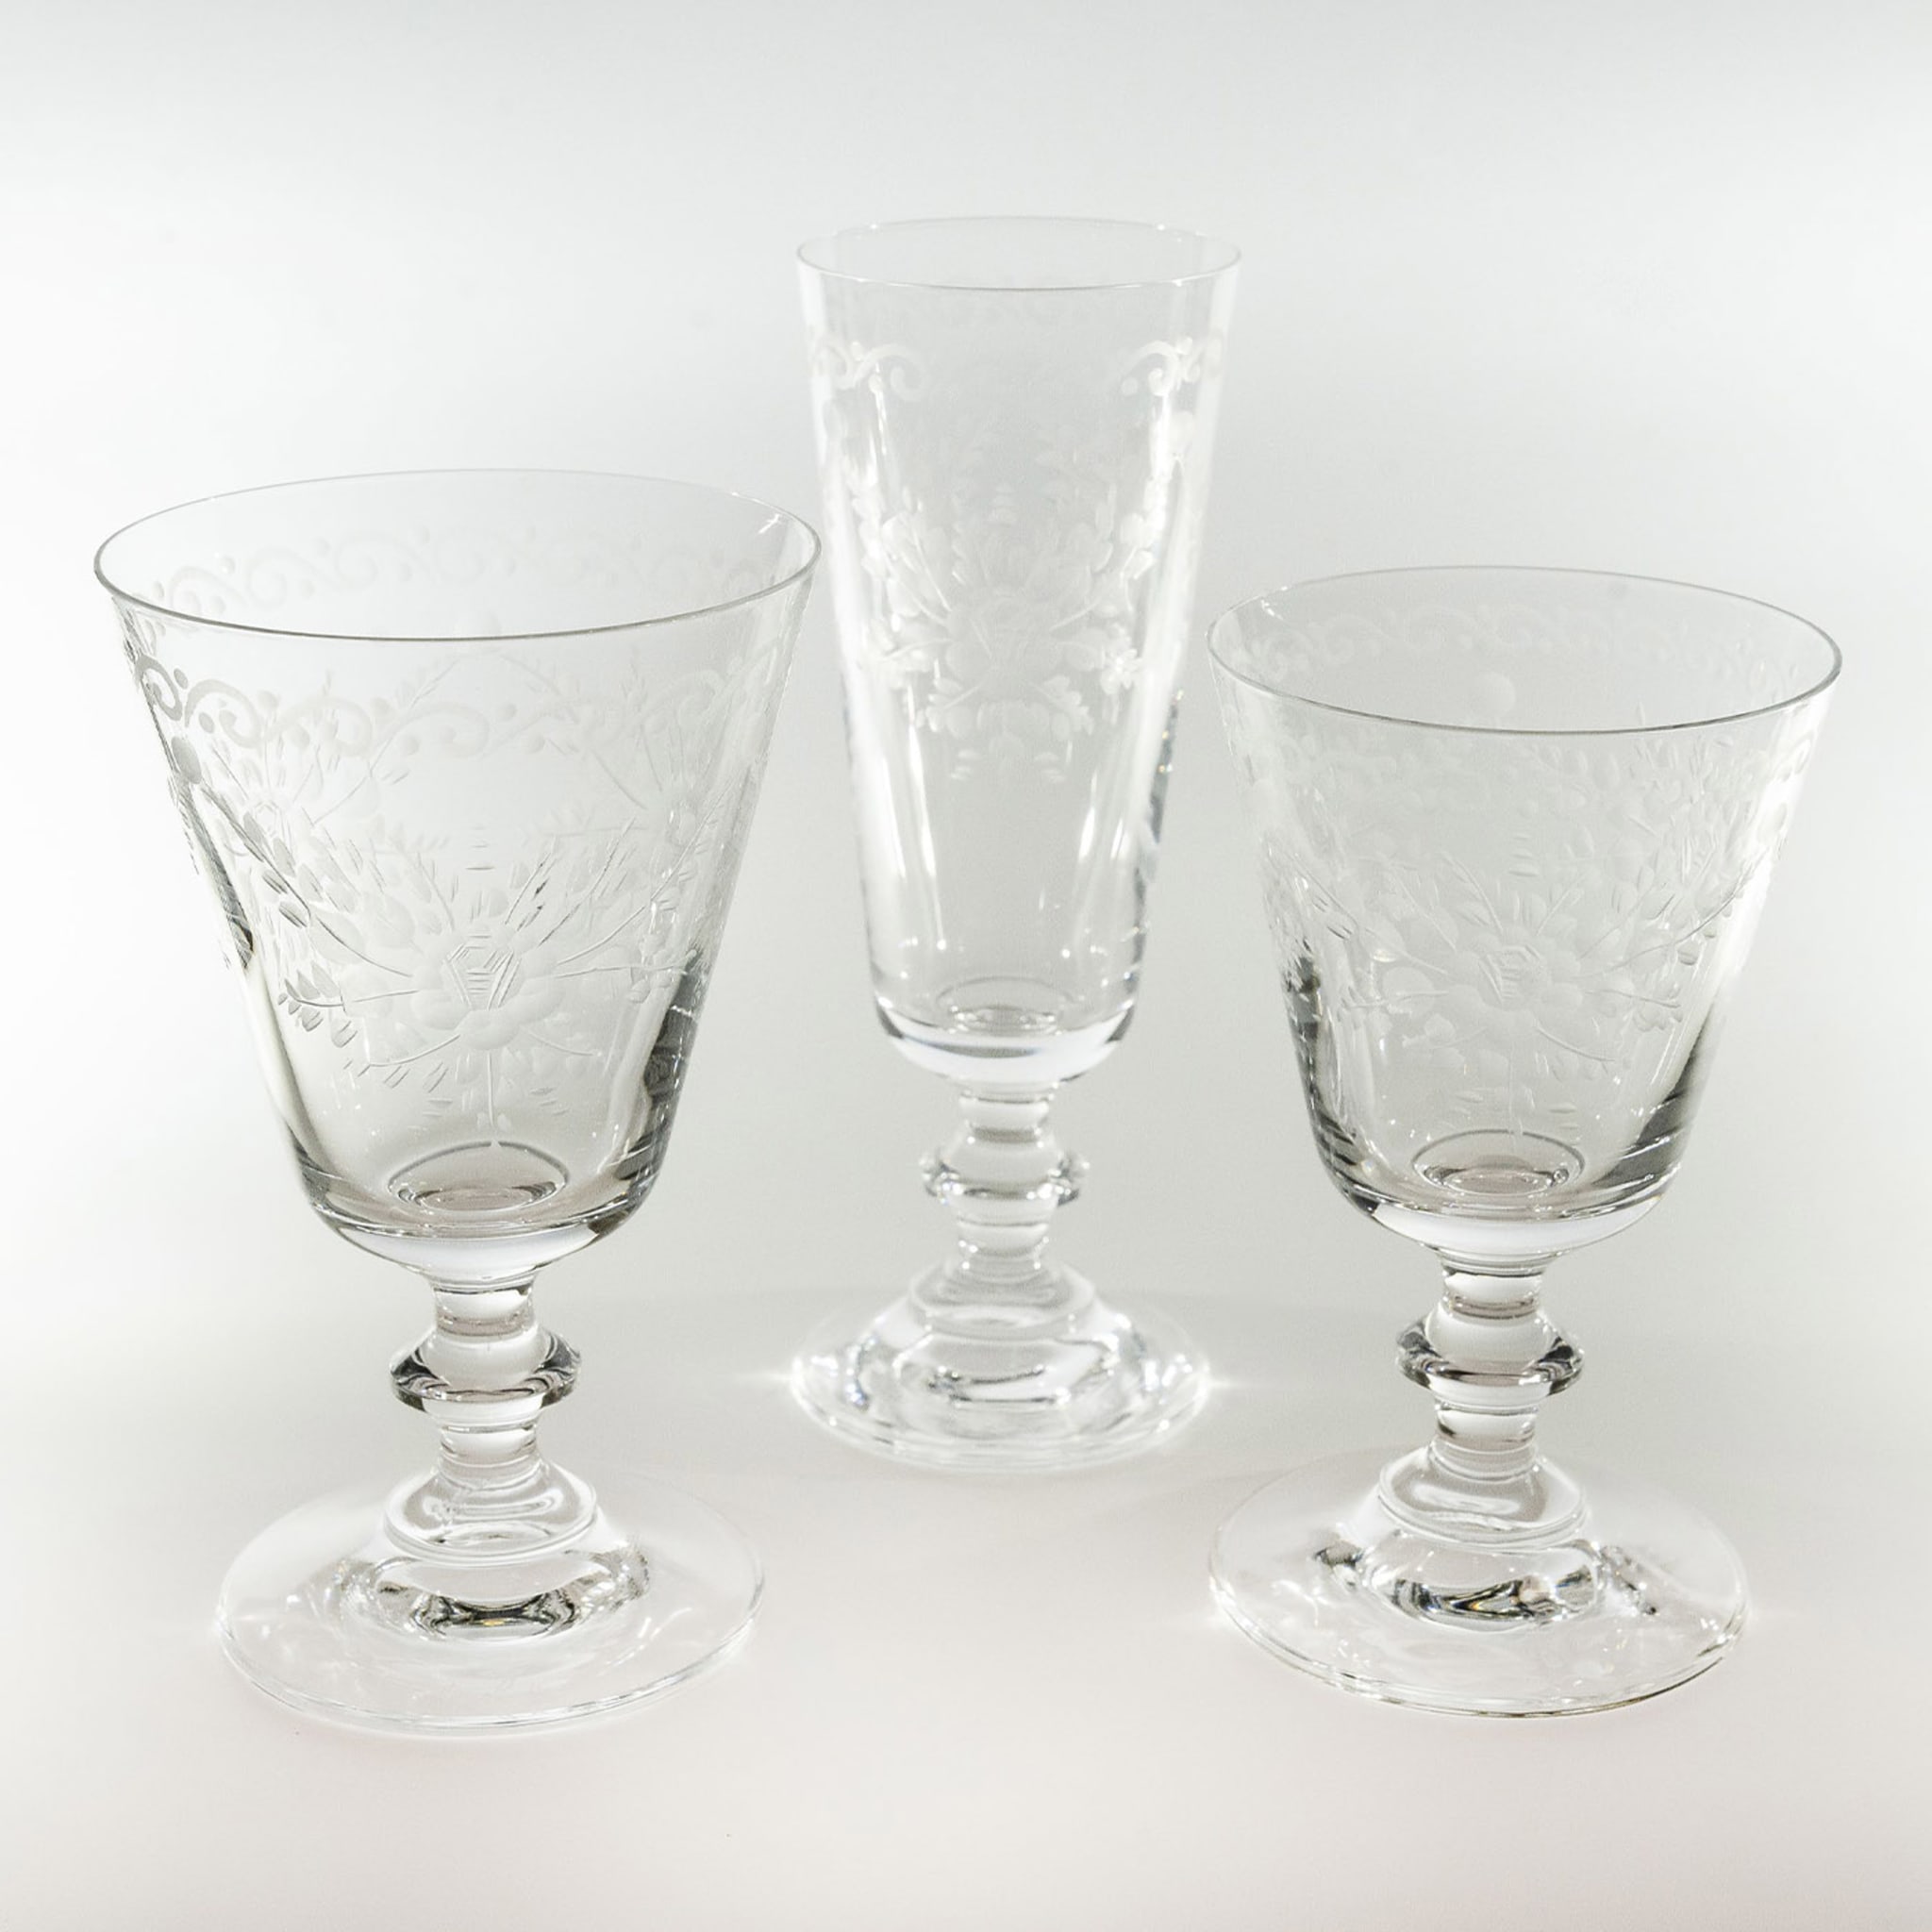 Vienna Set of 6 Etched Transparent Water Glasses - Alternative view 1